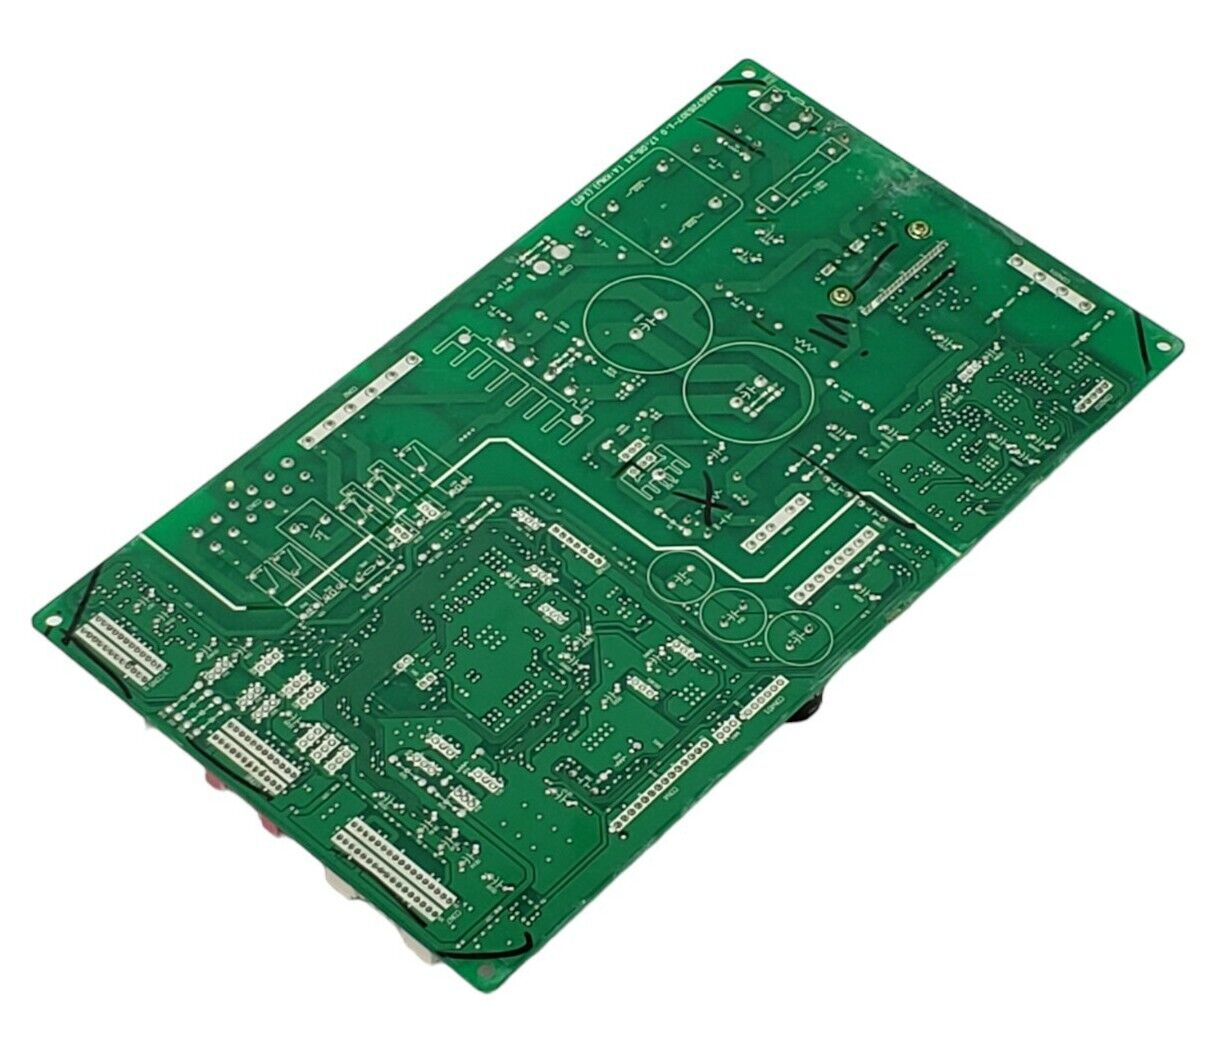 OEM Replacement for LG Refrigerator Control EBR81182783